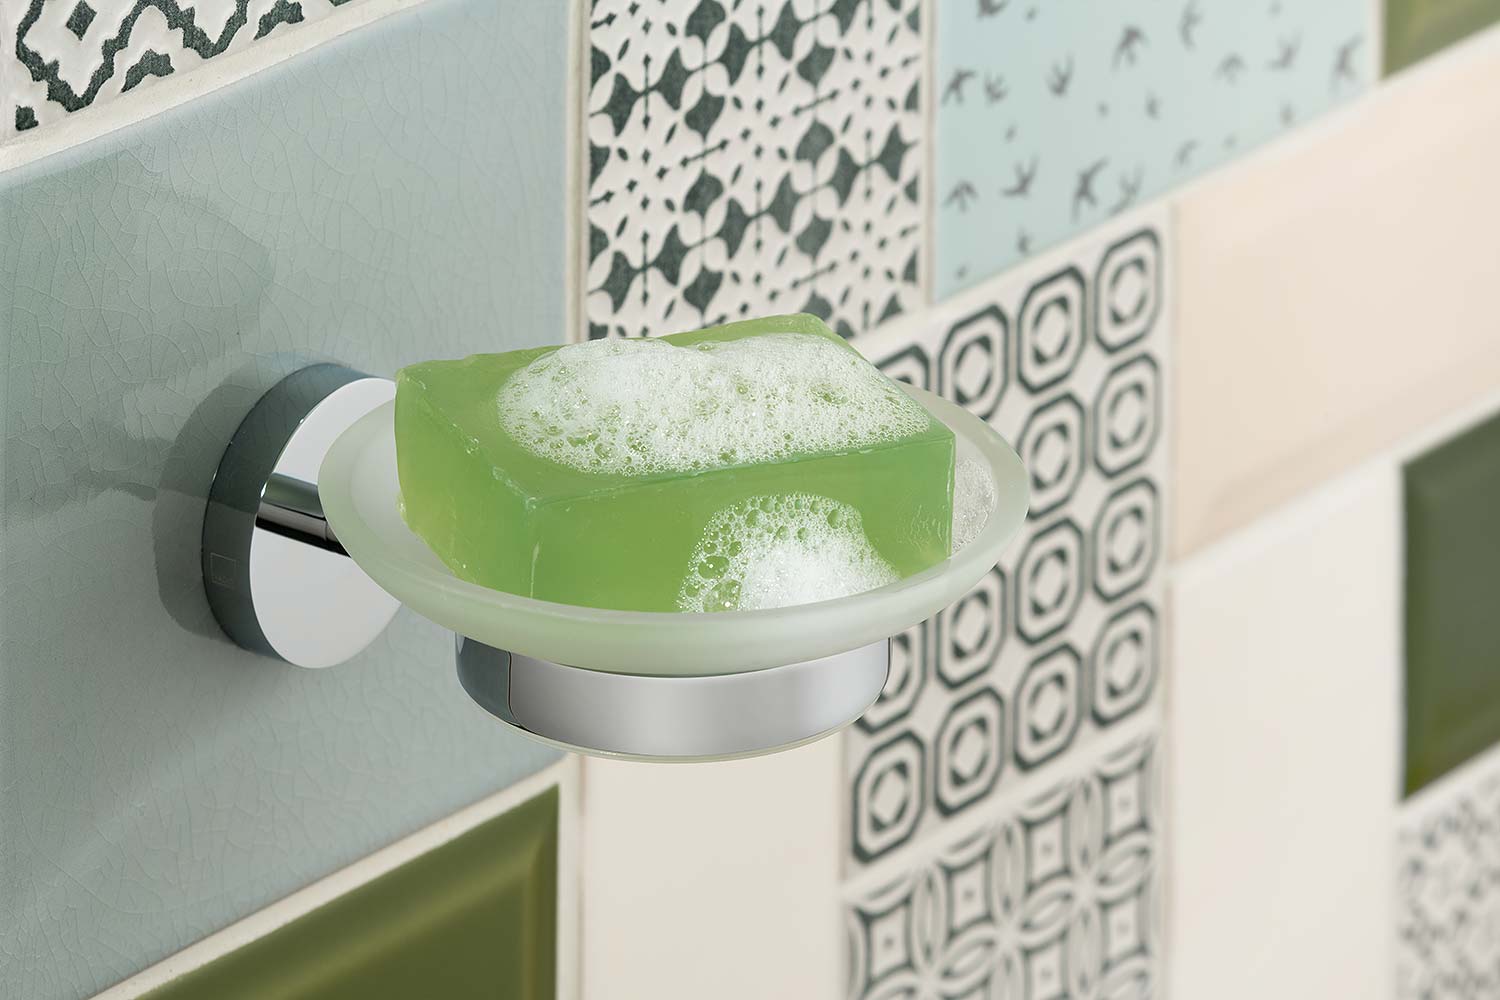 Round frosted glass with a green bar of soap and chrome holder on a funky tiled wall.